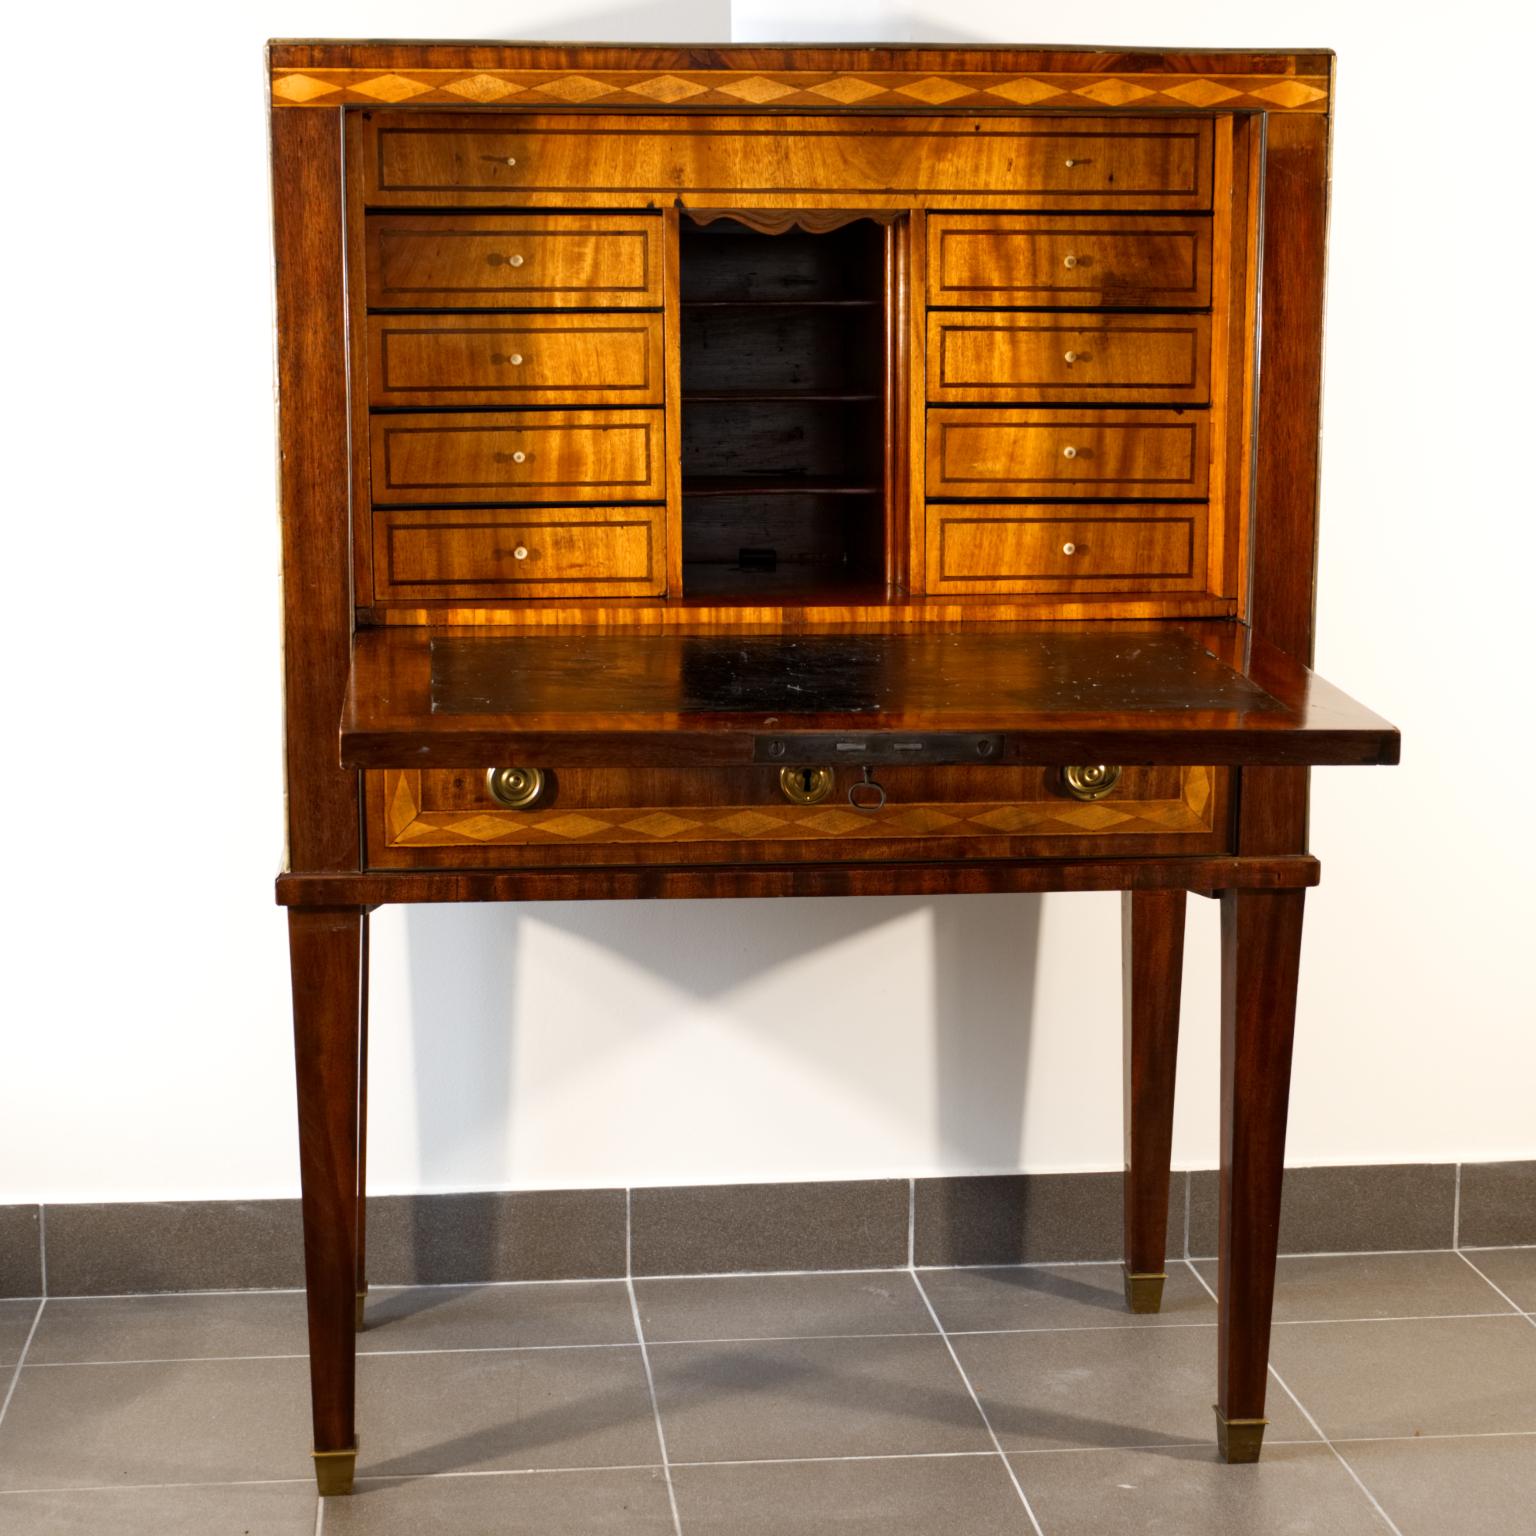 Swedish Gustavian mahogany writing cabinet. The writing part is covered with a black patent leather, with visible traces of use. The inner drawers have bone handles. The upper part is covered with mahogany veneer with brass strips and handles. The